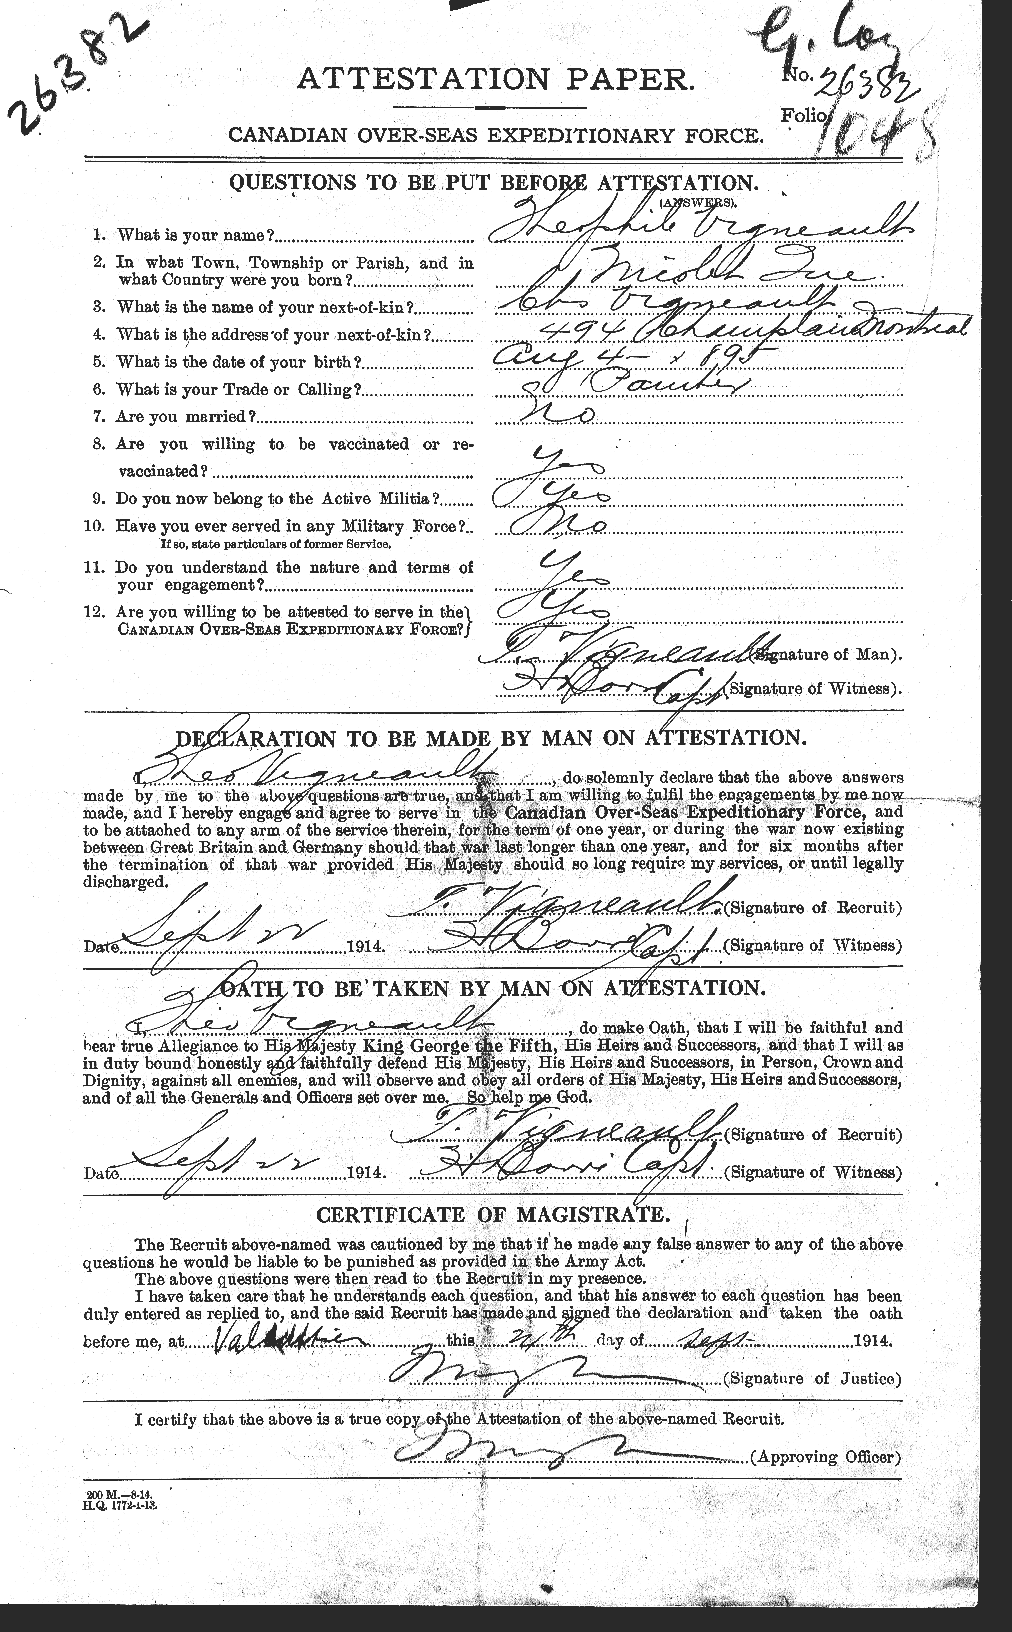 Personnel Records of the First World War - CEF 653704a